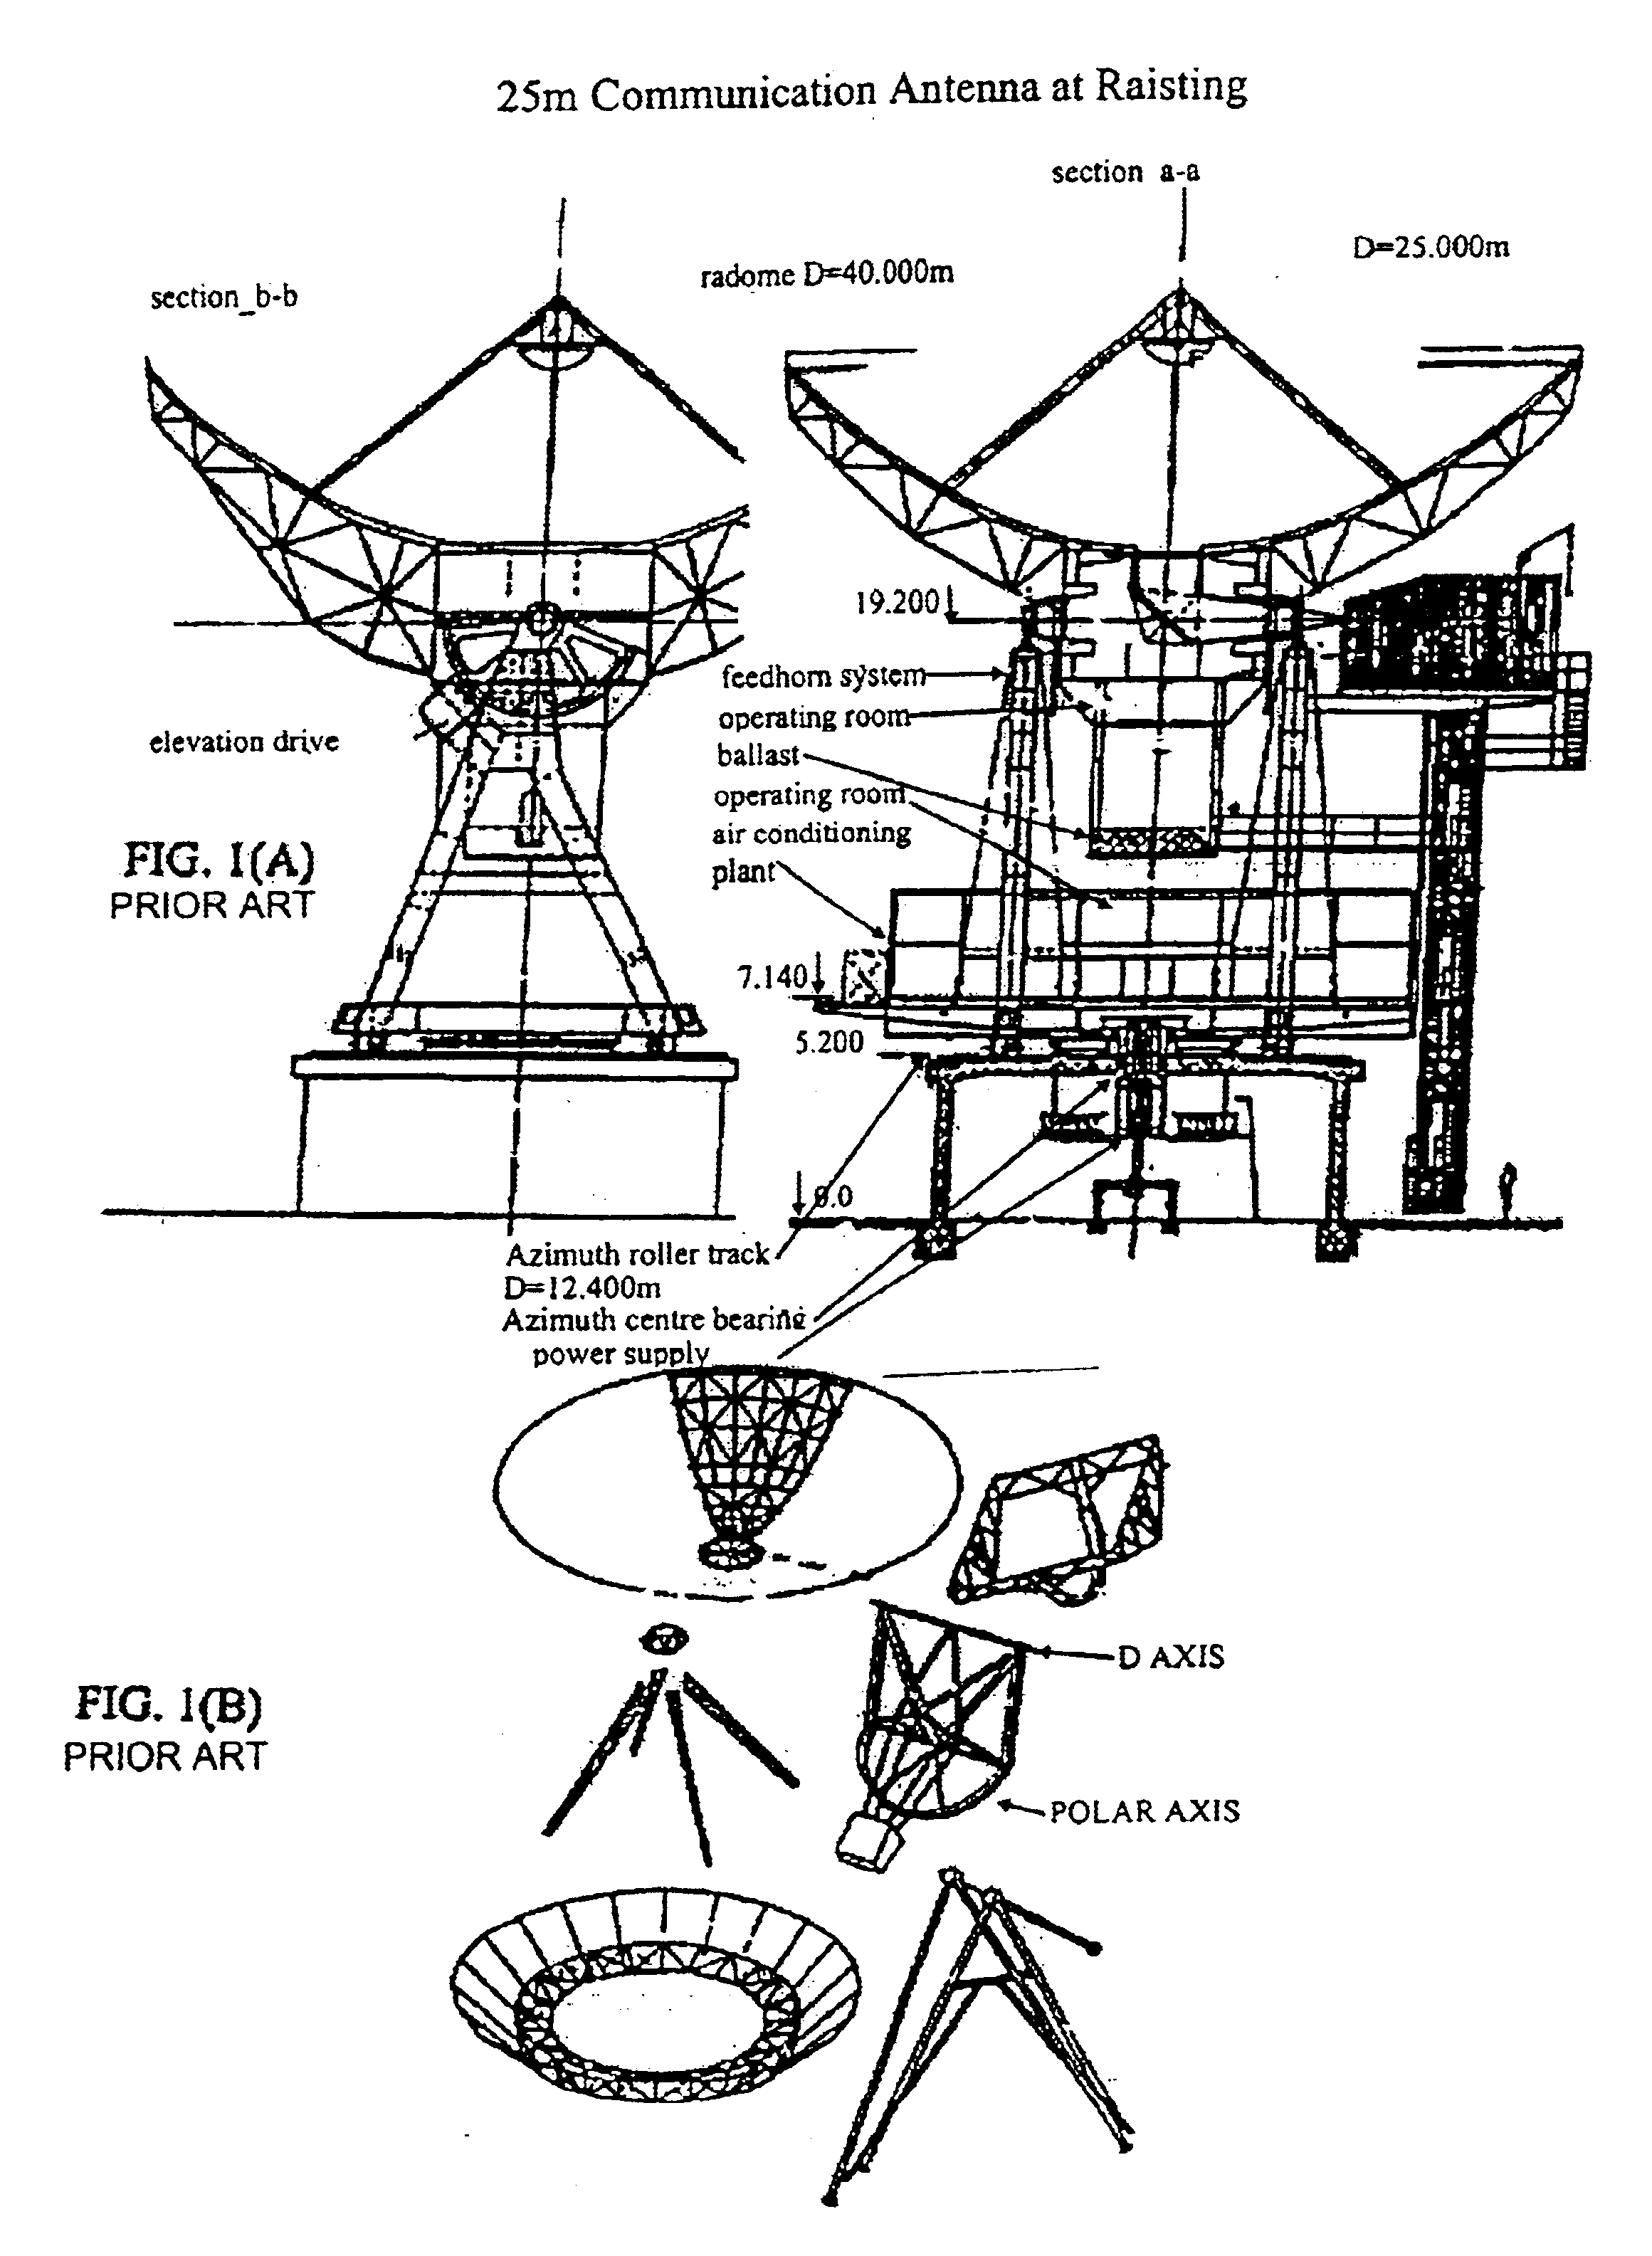 Preloaded parabolic dish antenna and the method of making it